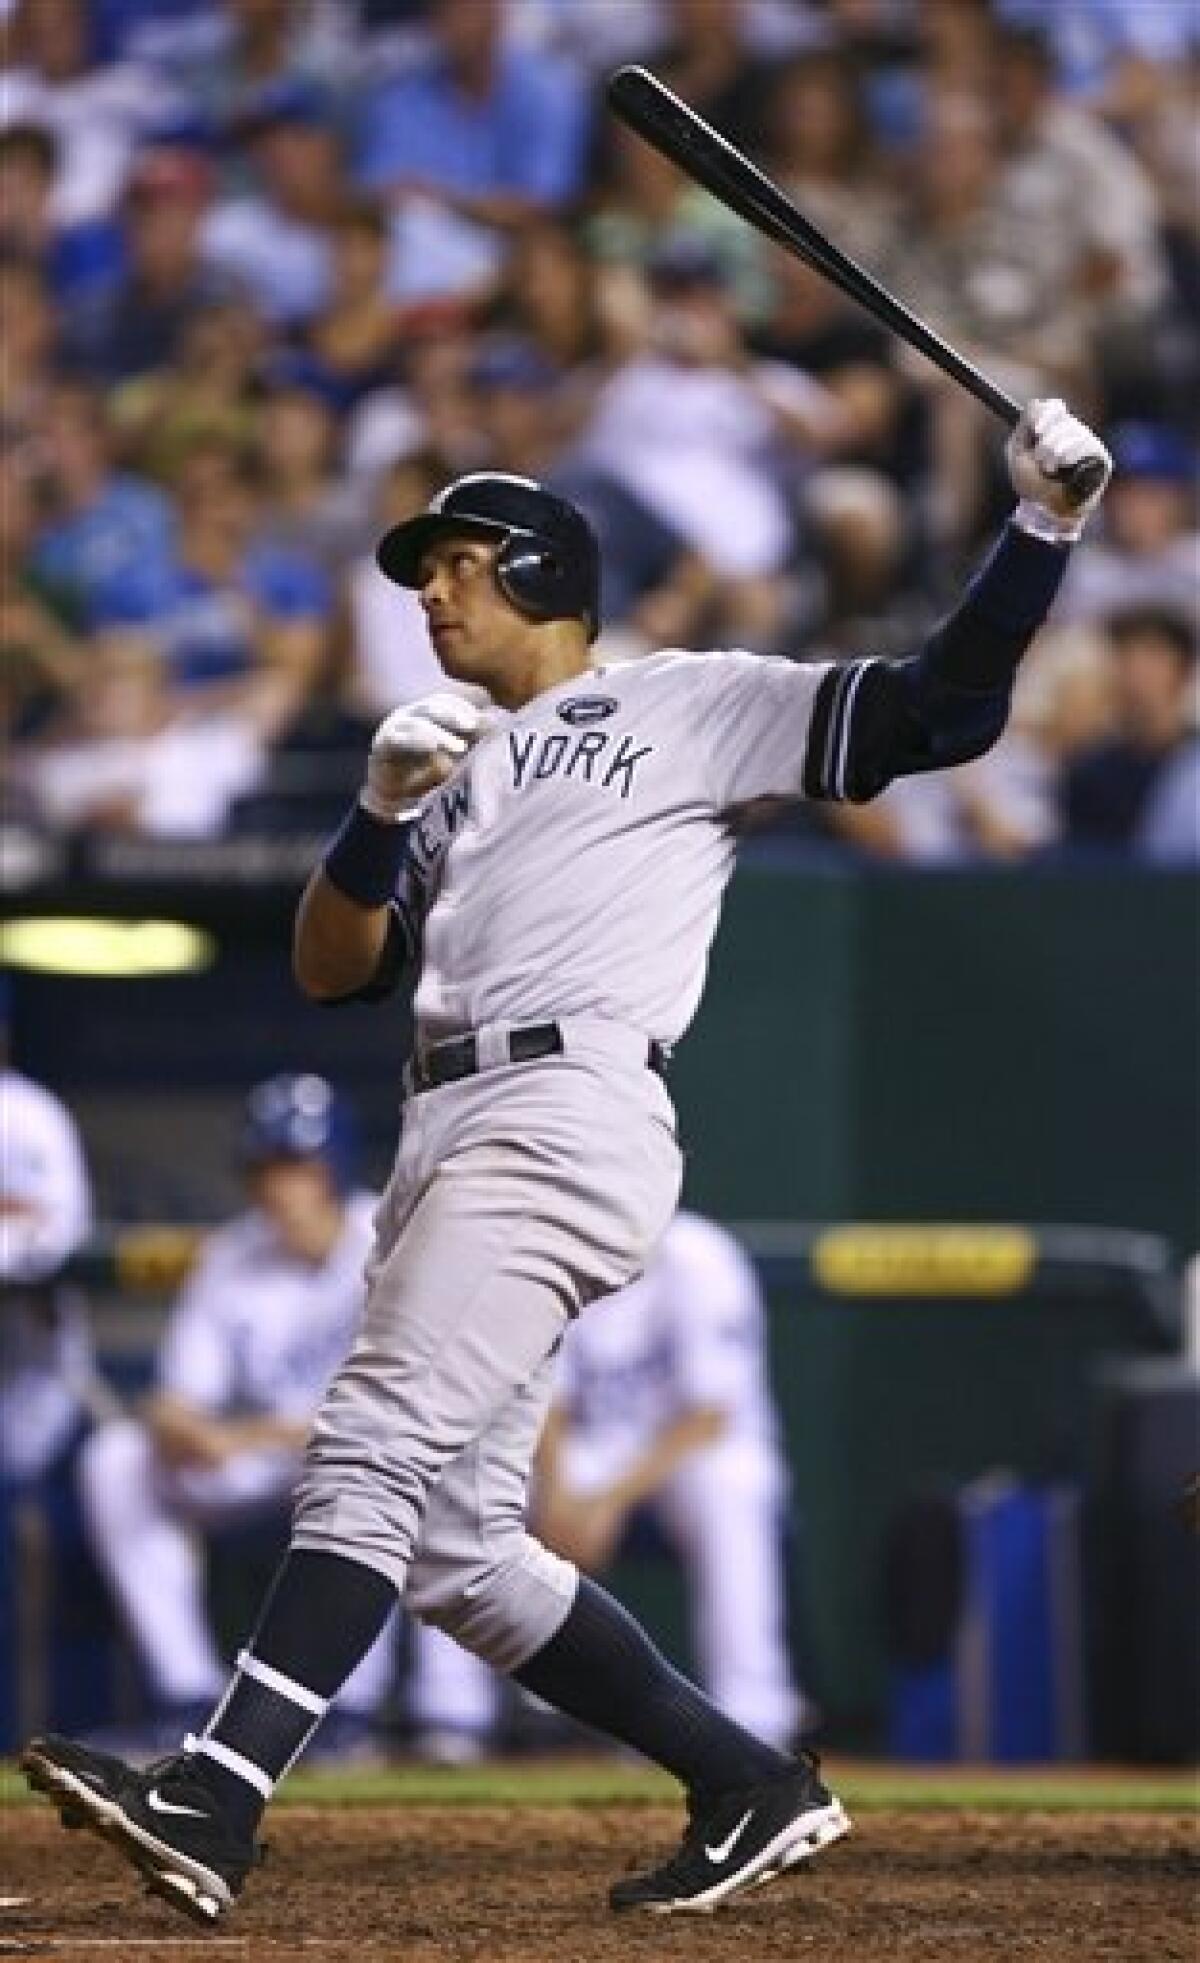 Yankees' Alex Rodriguez to play final major league game Friday